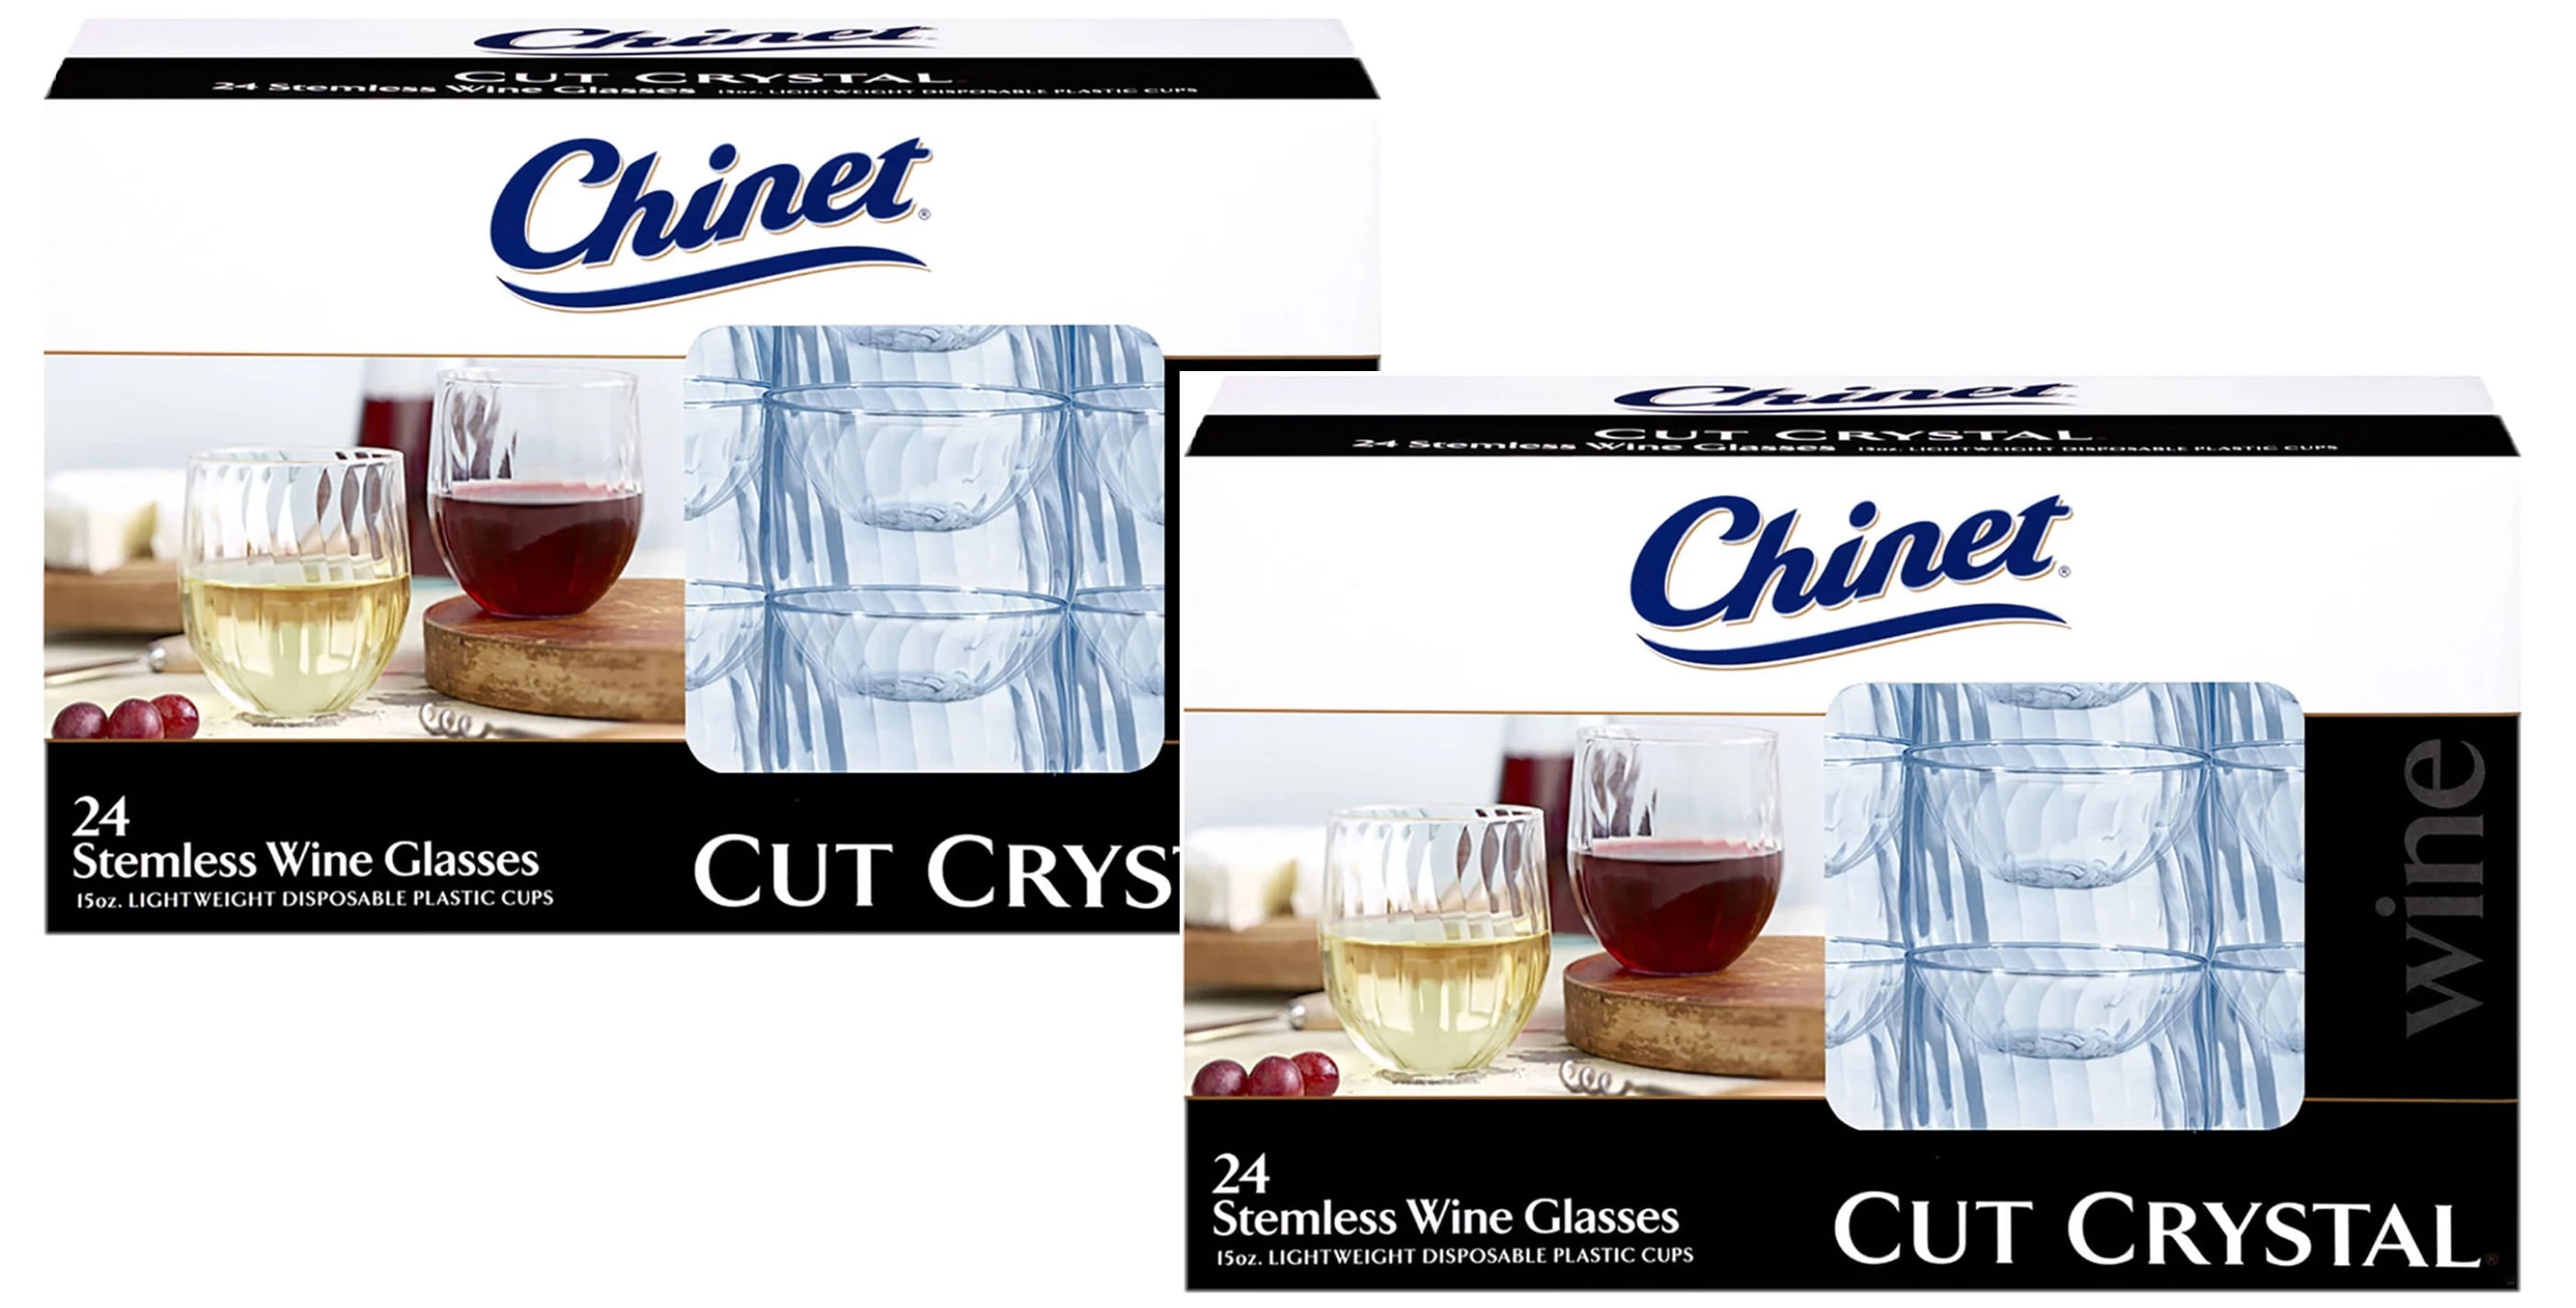 2 Pack  Chinet Cut Crystal Stemless Plastic Wine Glasses, 15 oz. (24 ct.)  